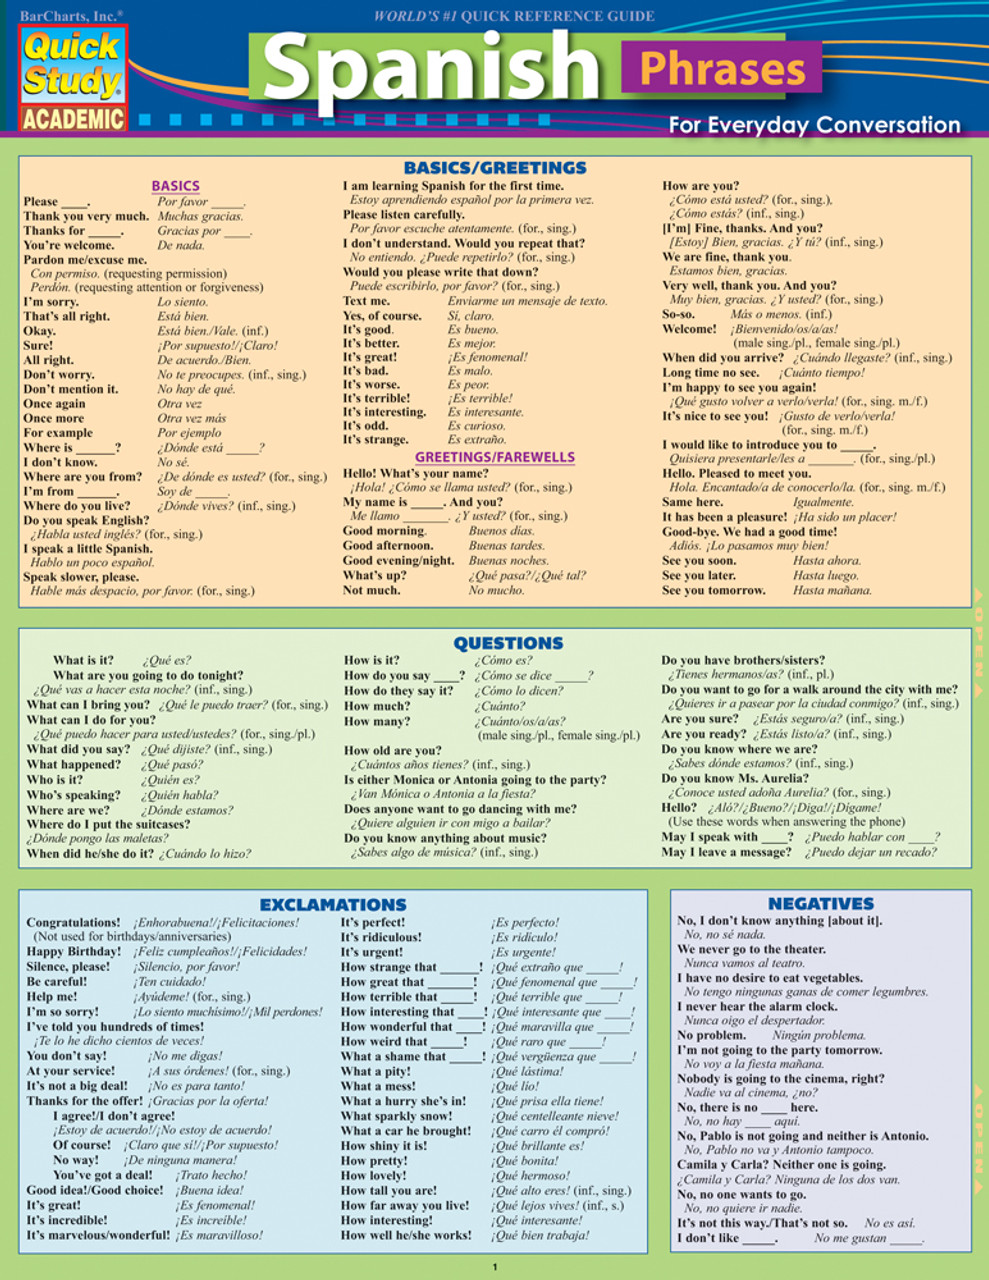 Quickstudy Spanish Phrases Laminated Study Guide